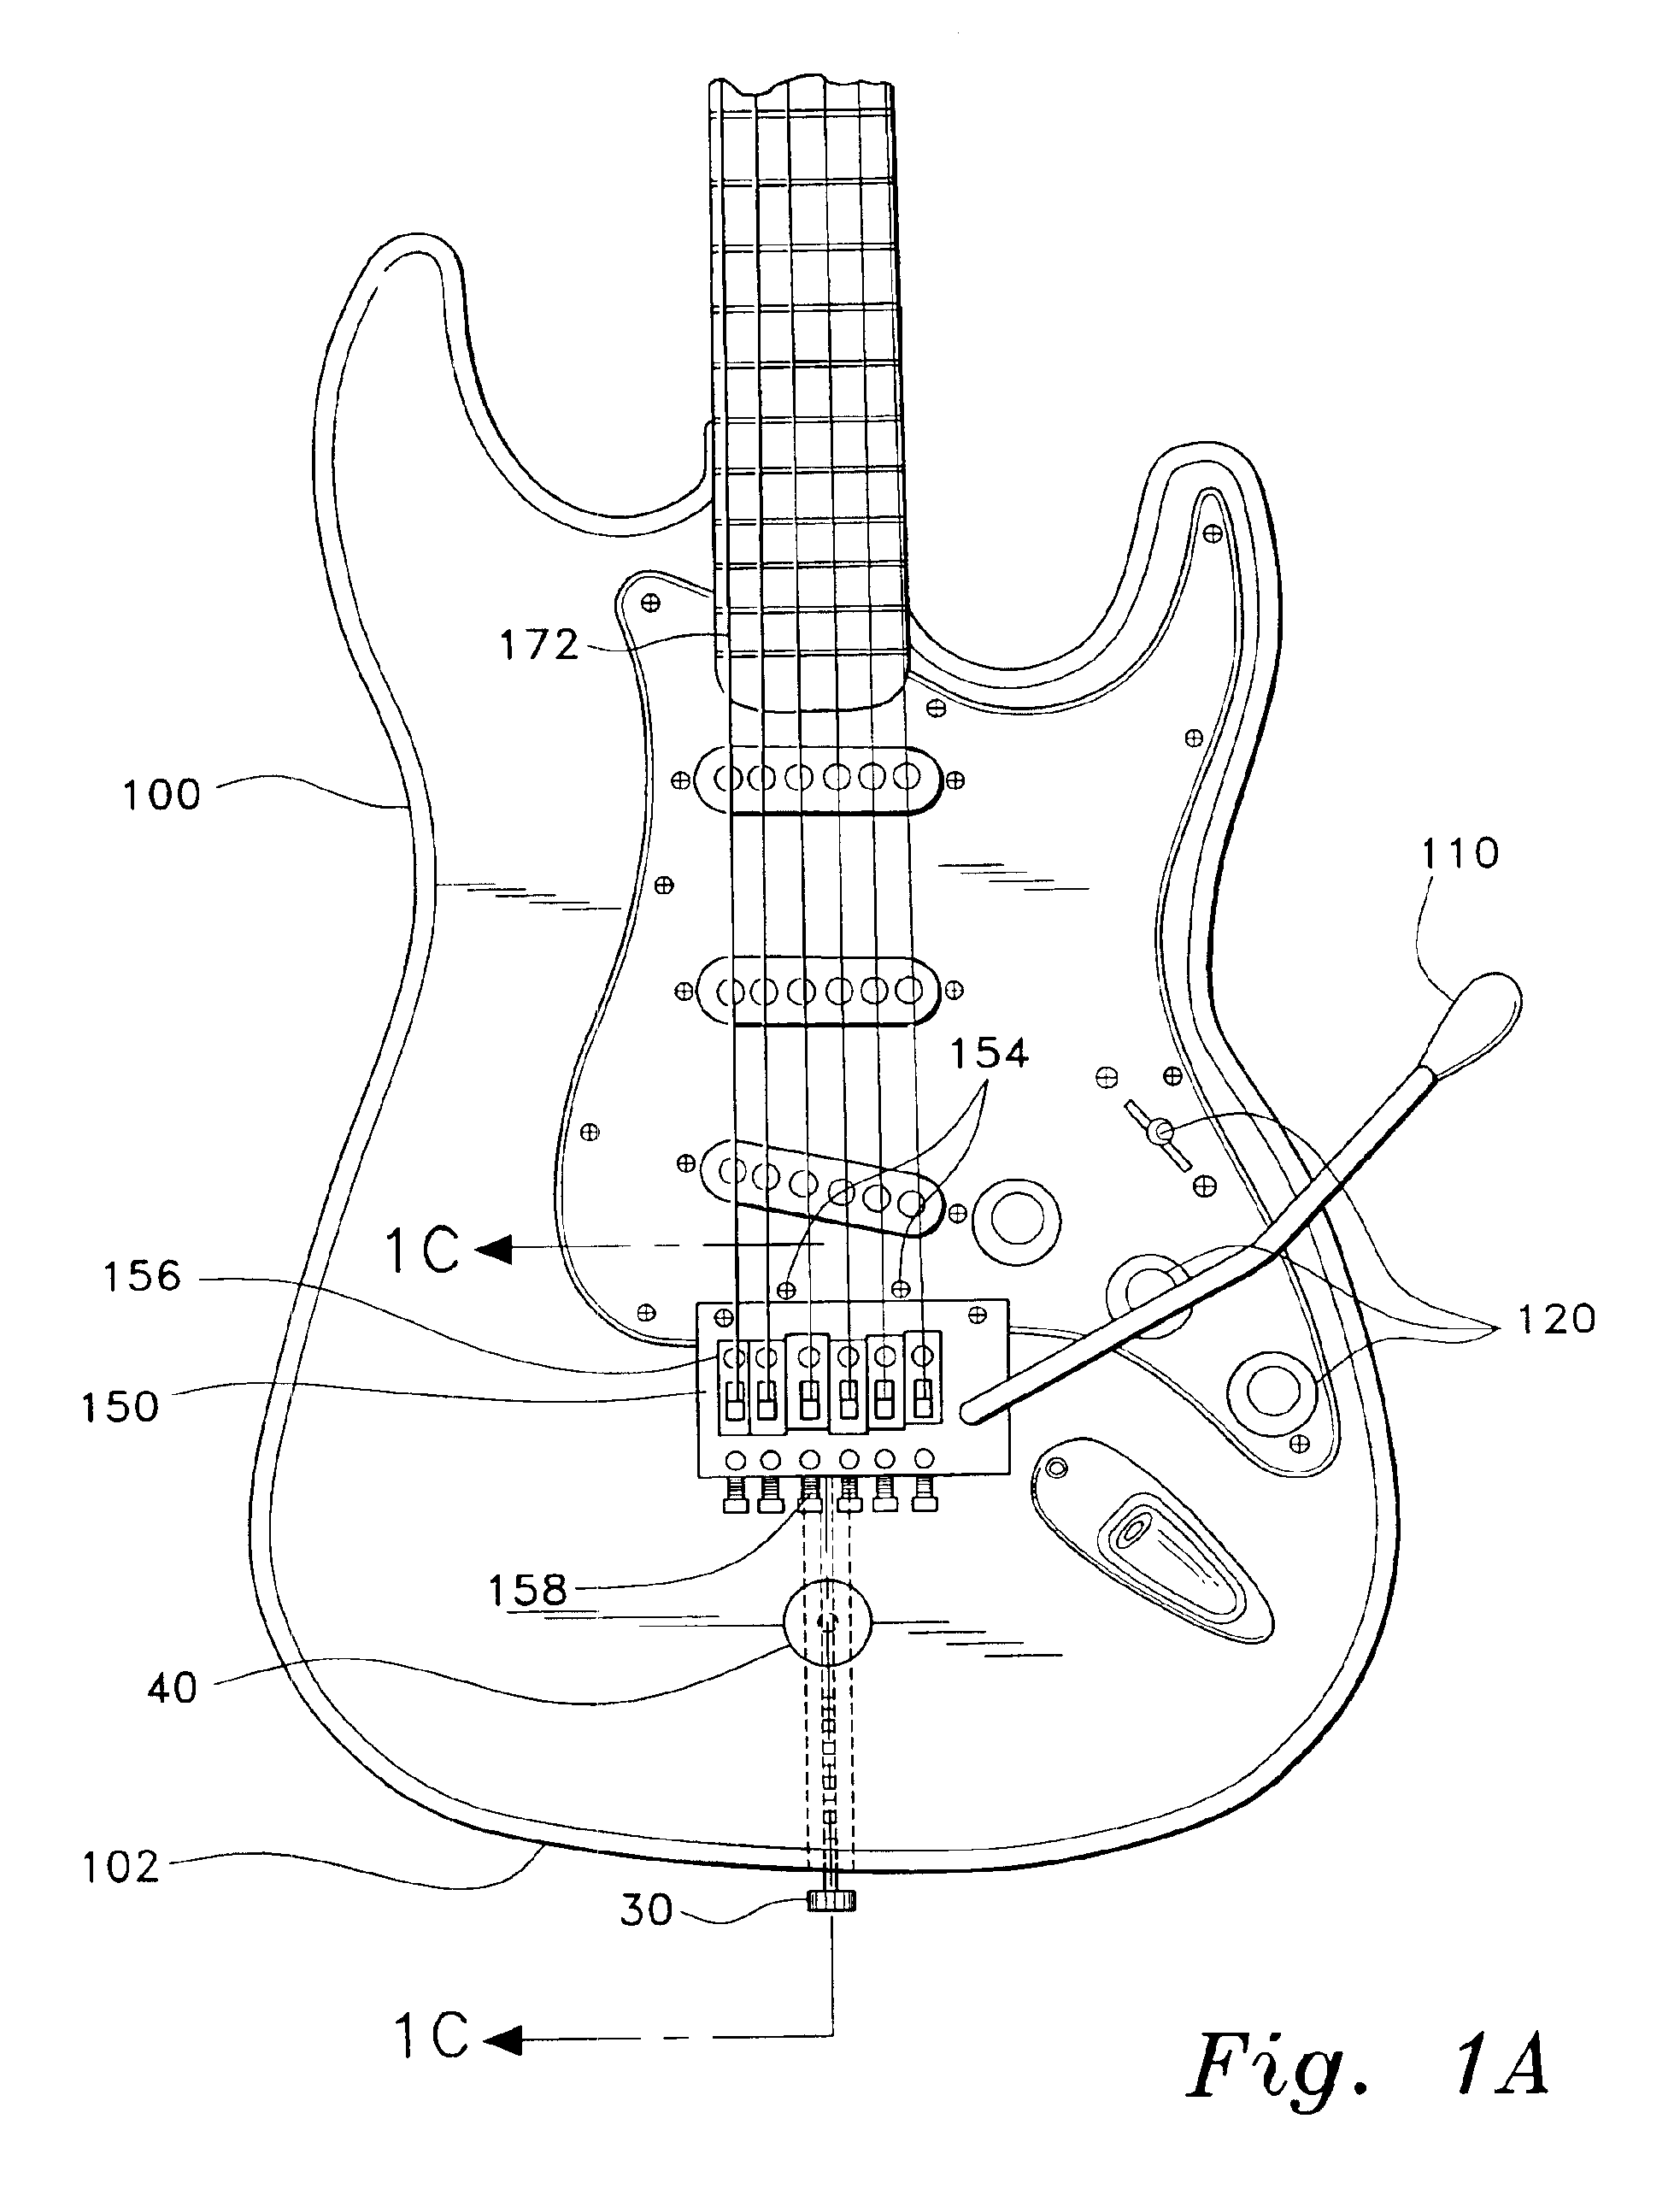 Guitar tremolo locking and tuning stabilizing device